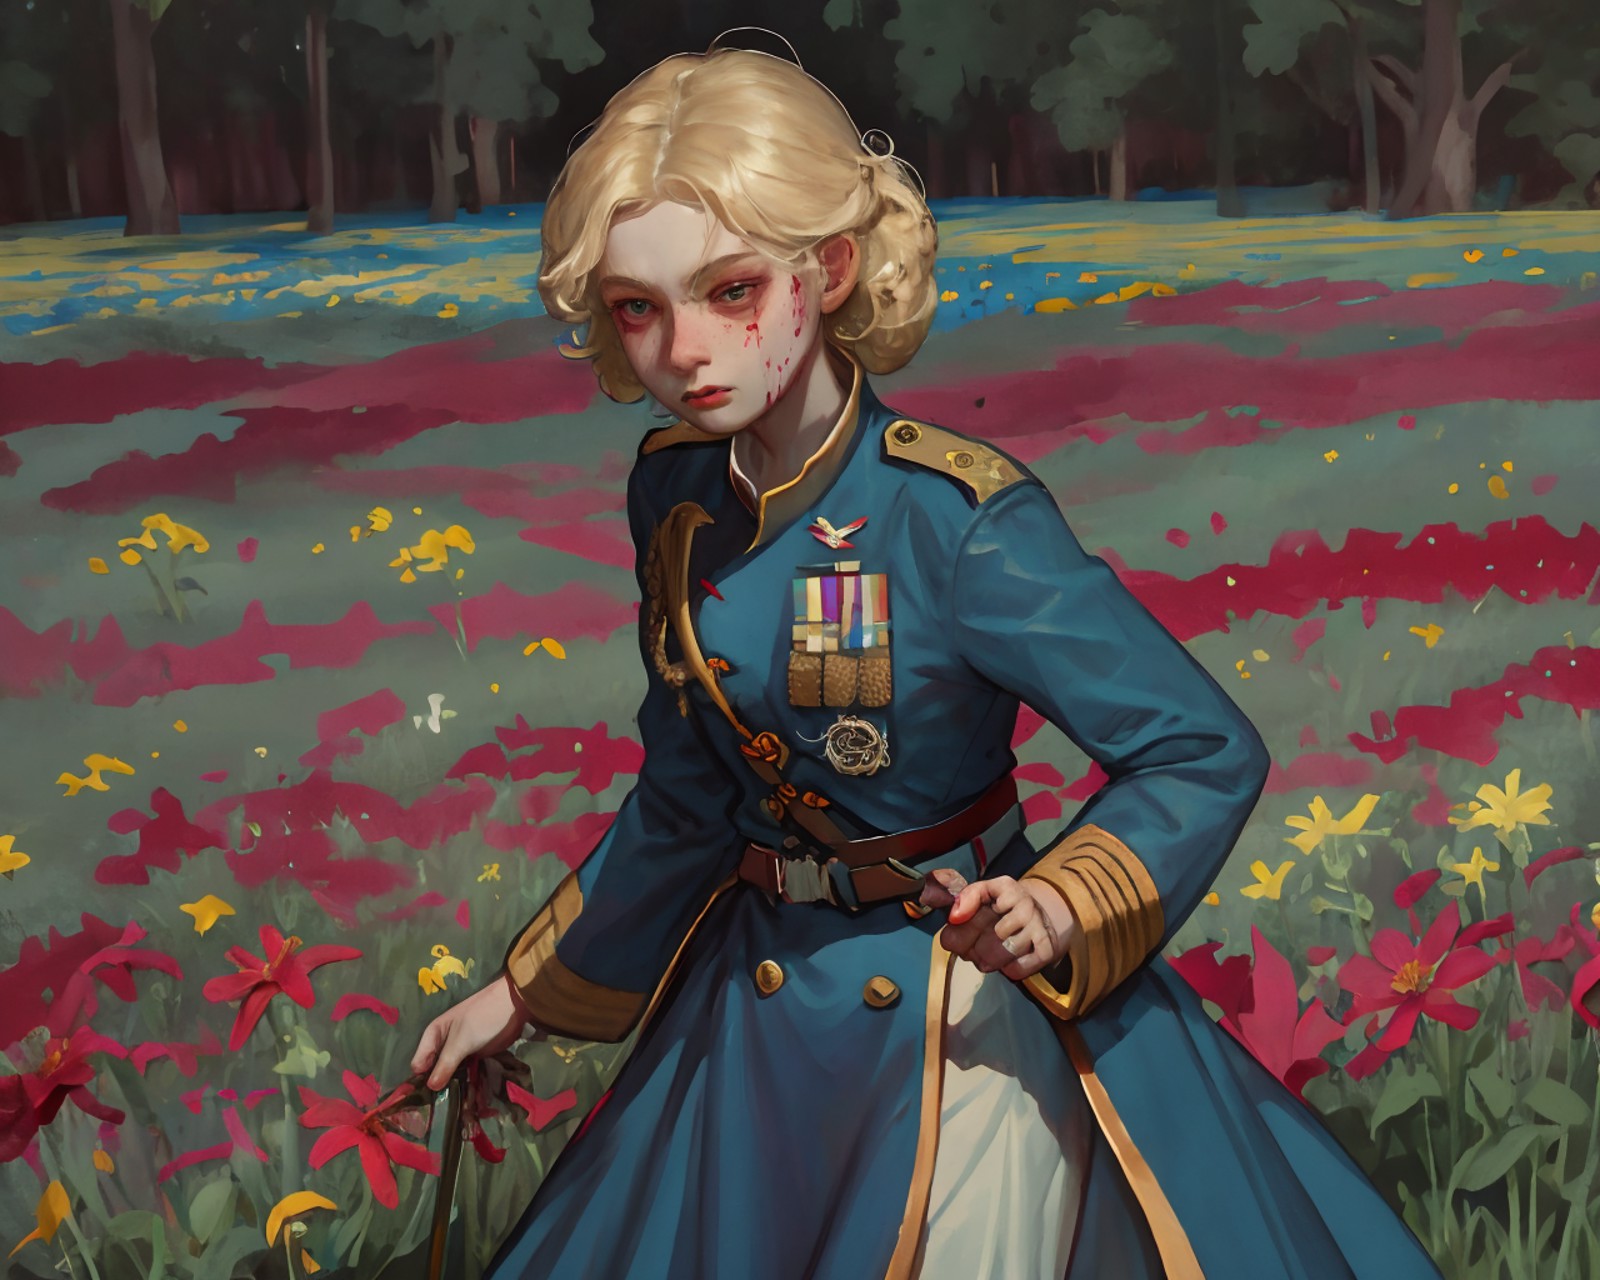 standing in a field of flowers, (torn flag in background:0.8), (battlefield:1.0), (blood:1.0), absurdly long curly blonde ...